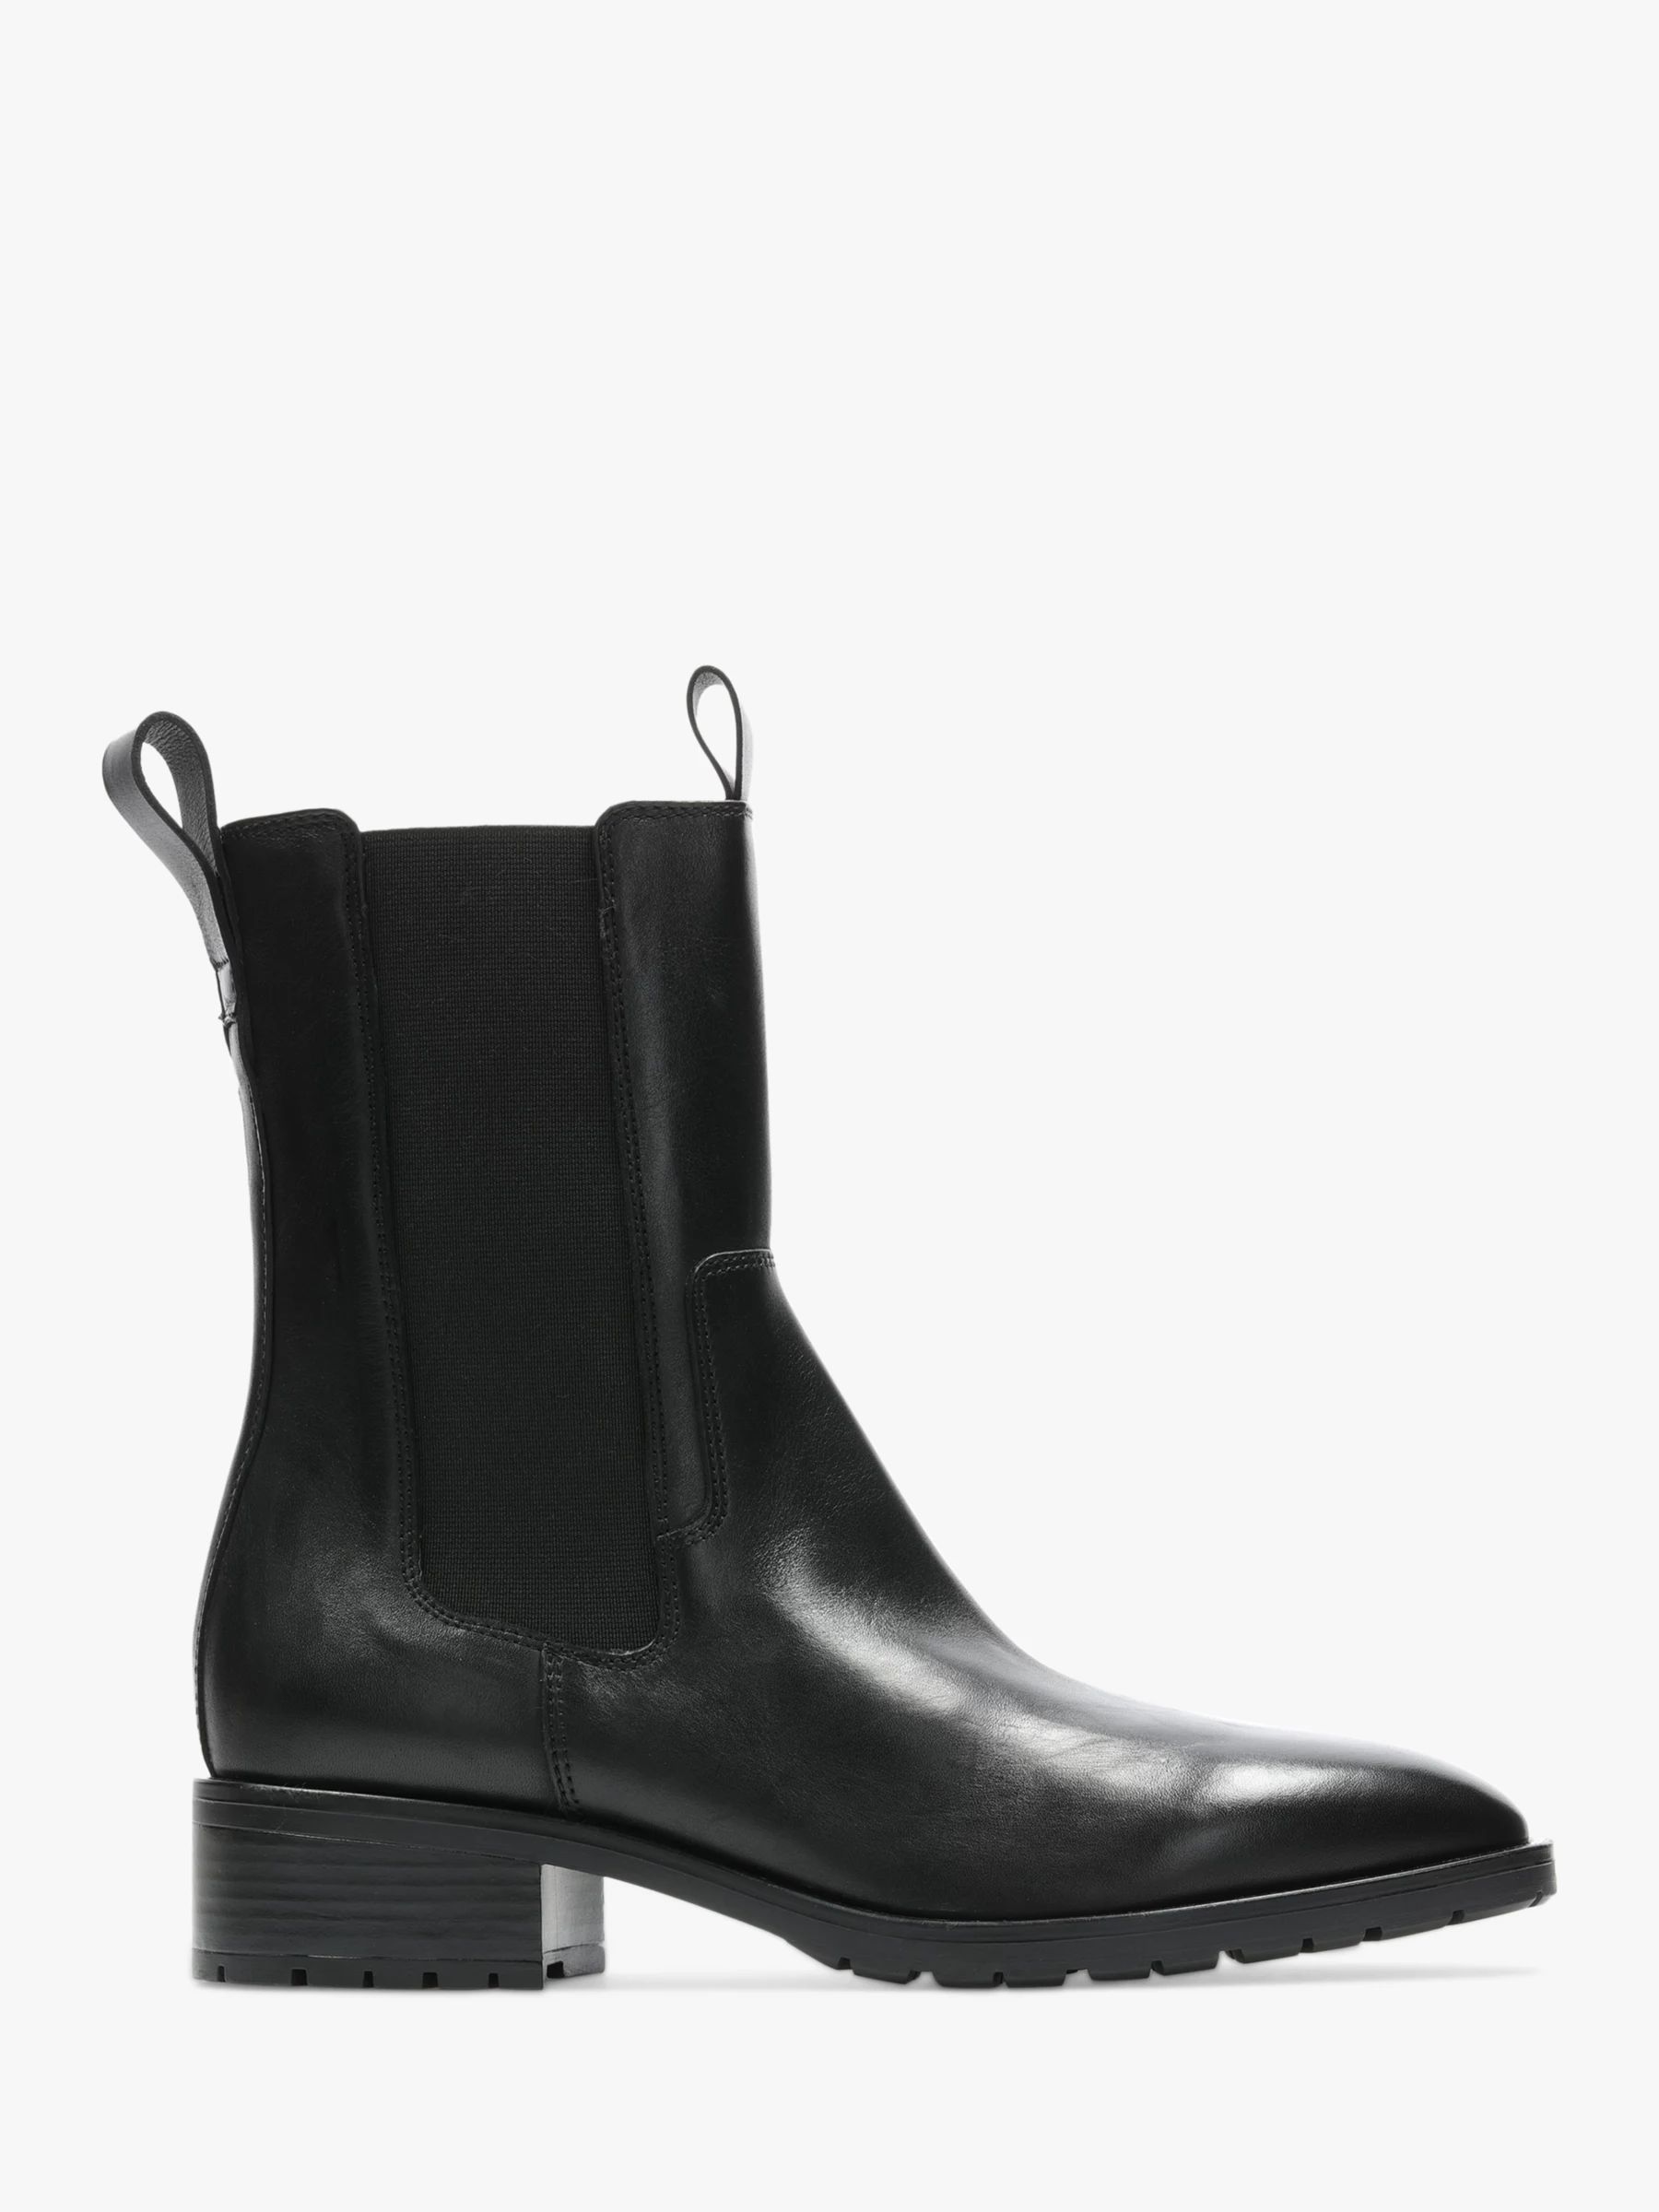 Clarks Lydia Top Leather Ankle Boots, Black | John Lewis (UK)